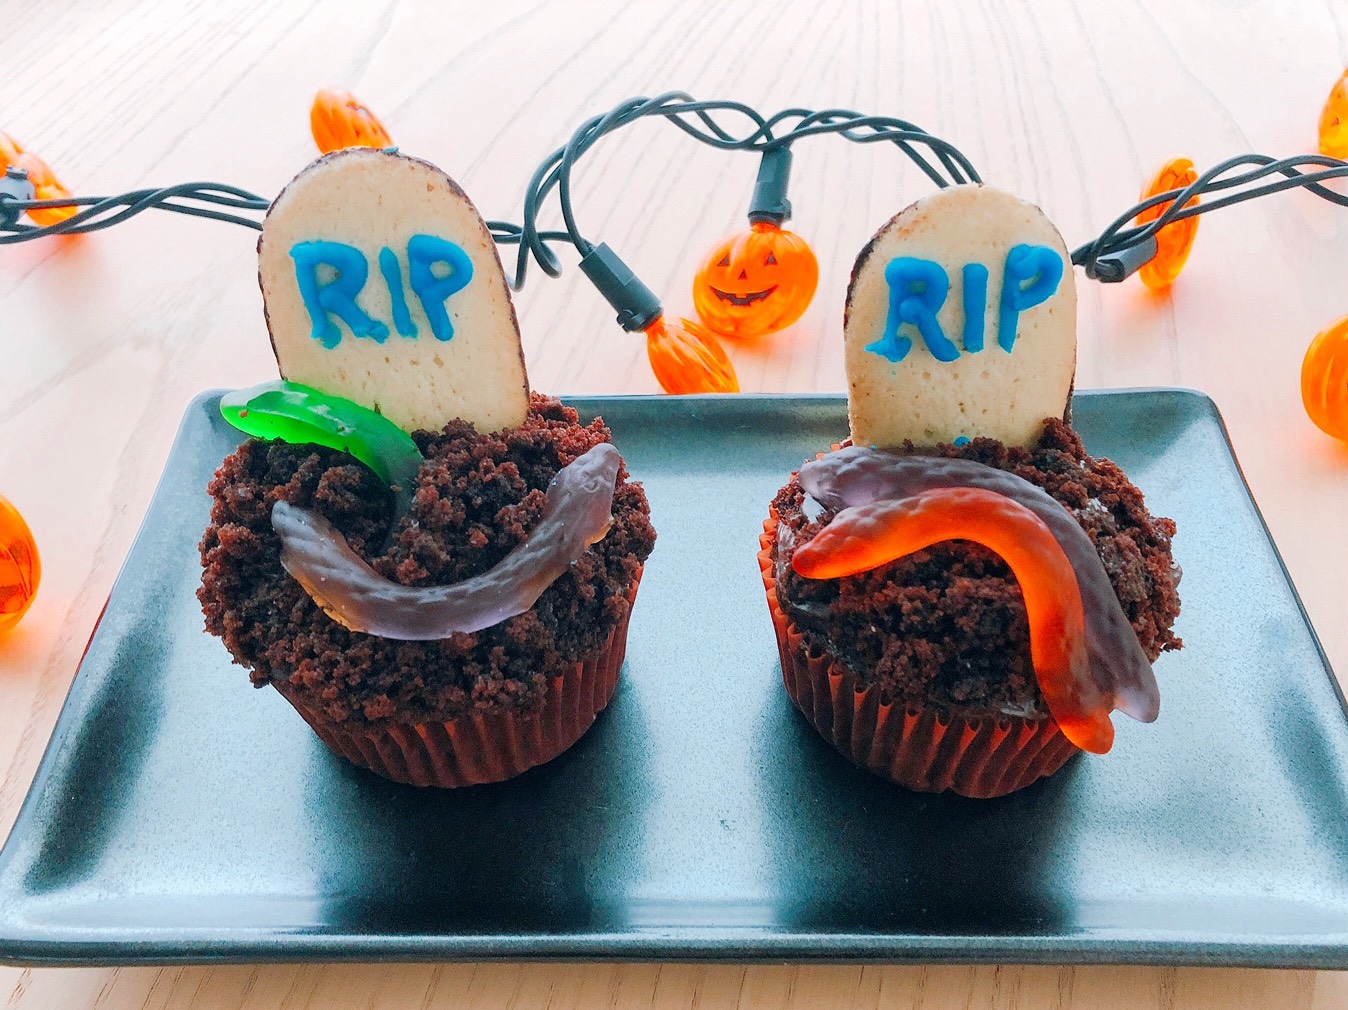 Milano cookies make the tombstones for this Halloween cupcake.